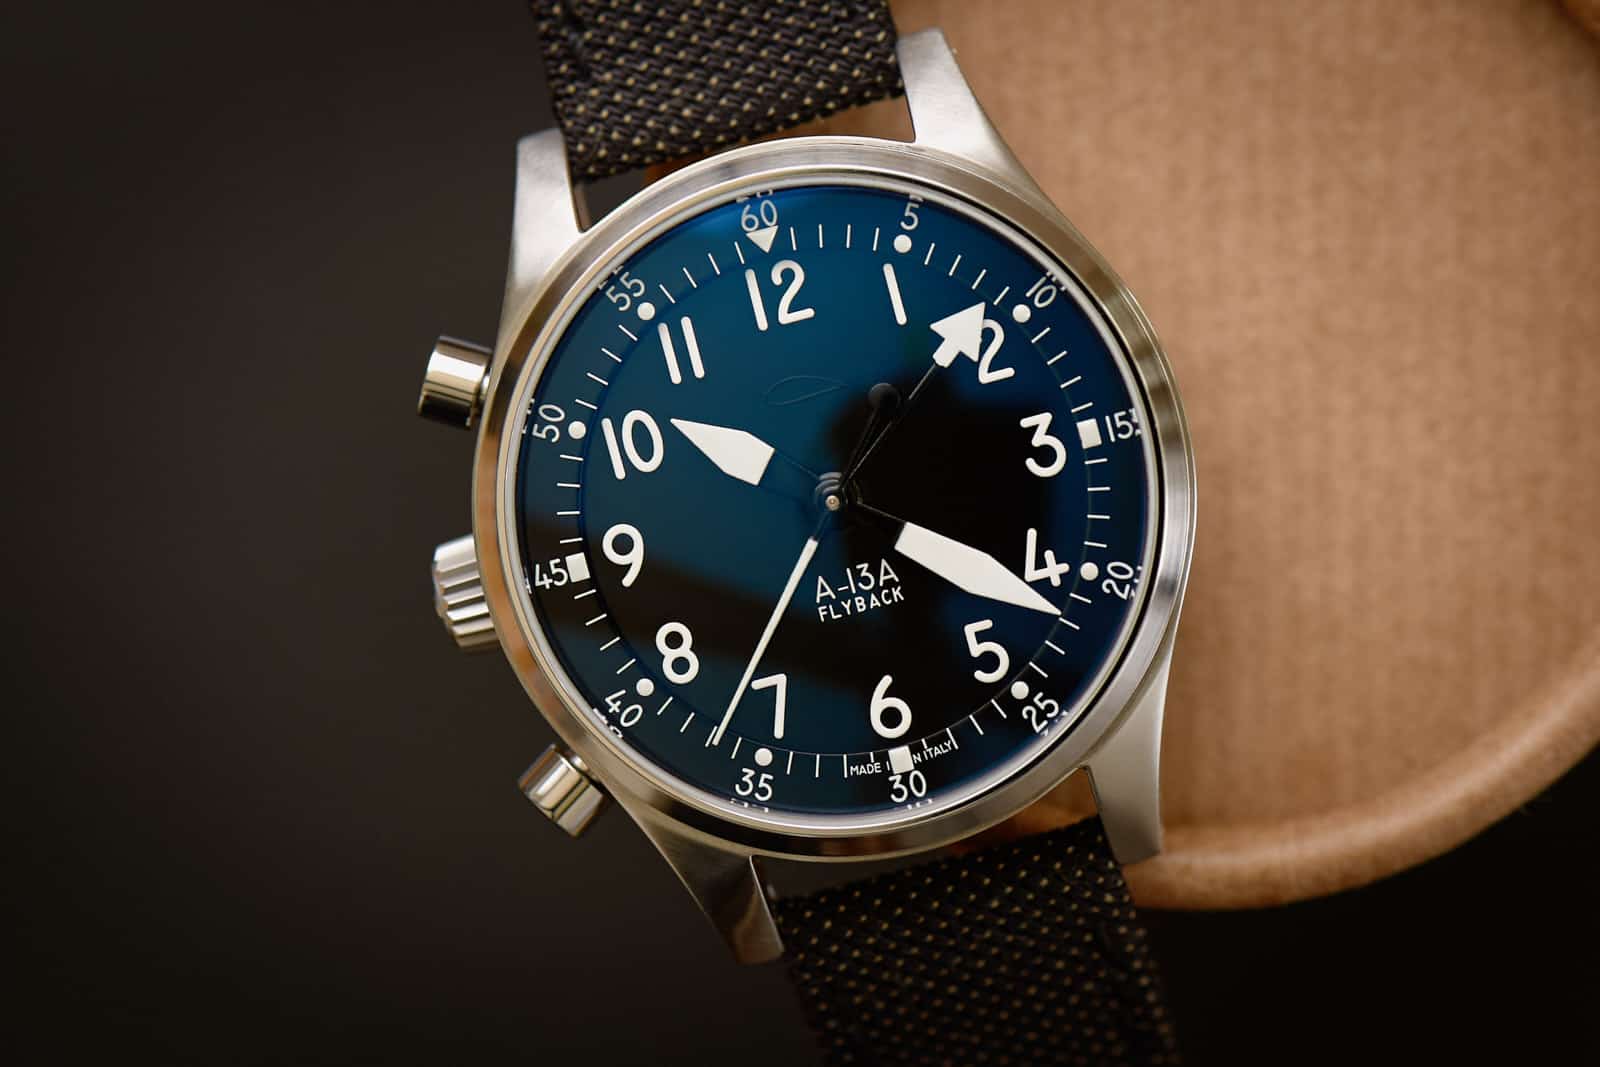 Christmas for Chronograph Fans: The A-13A Mechanical Will Launch on Kickstarter Today